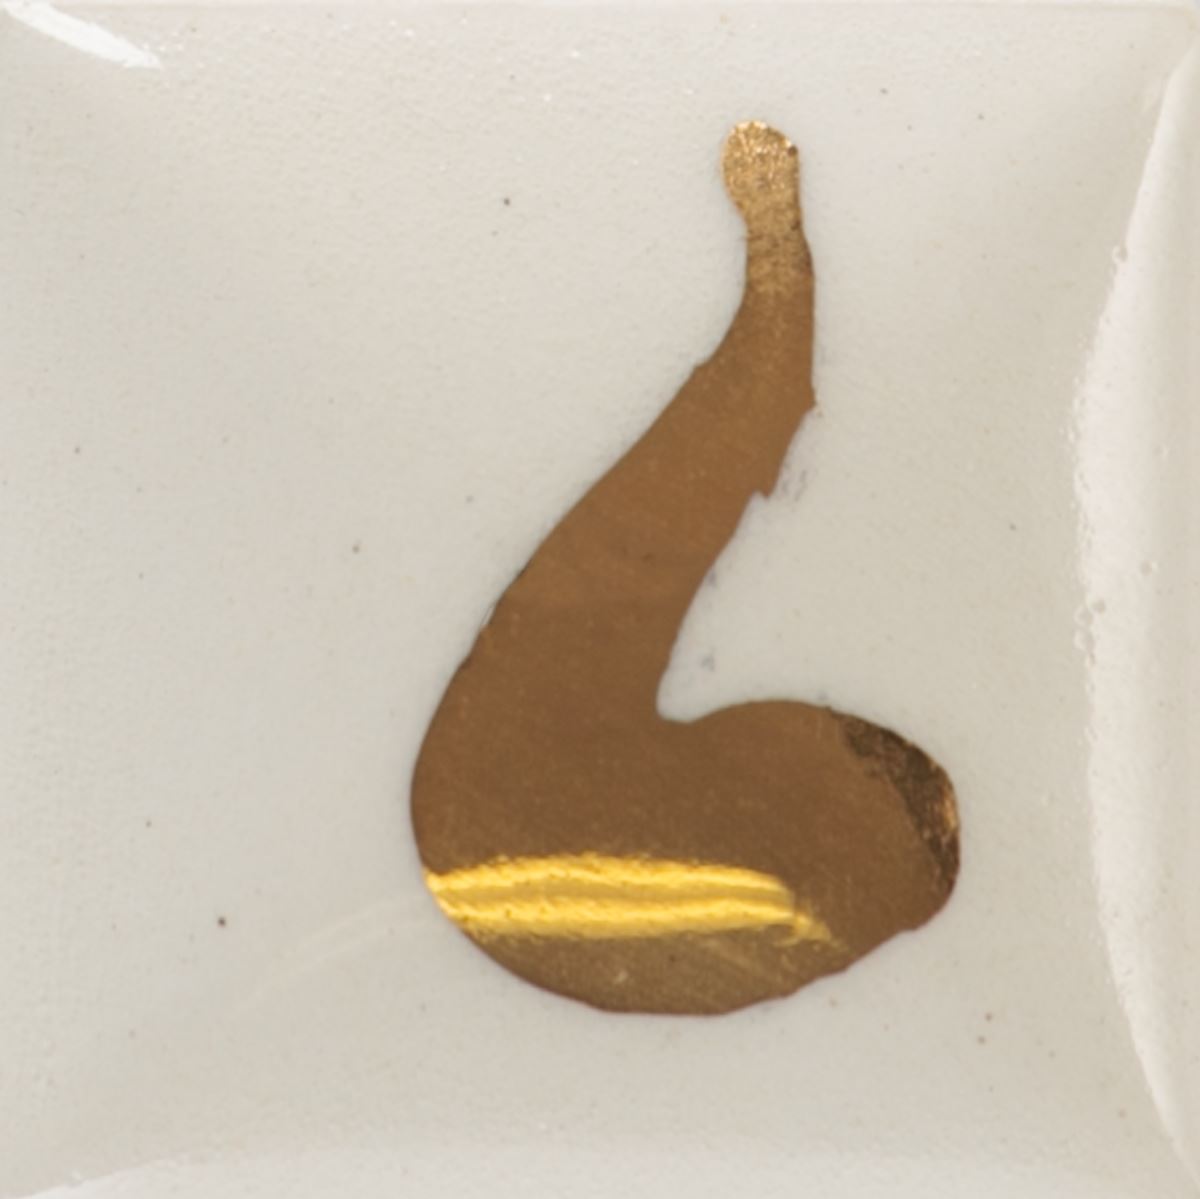 Bright Gold Overglaze 5% - Great White North Pottery Supplies